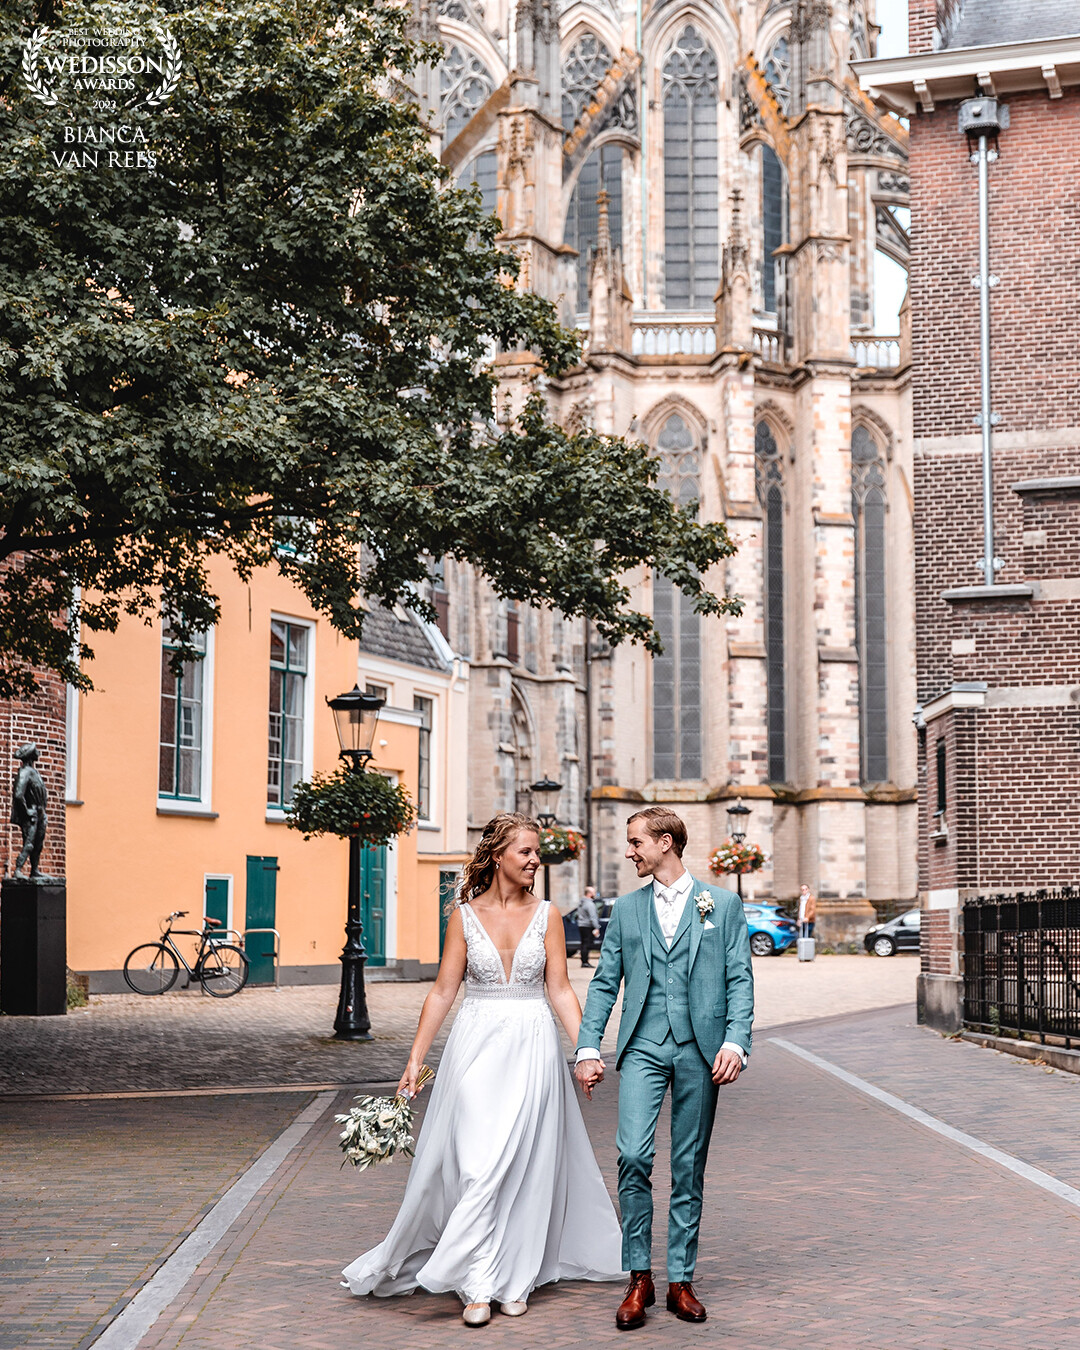 This beautiful couple got married in Utrecht. At first, we would shoot the wedding reportage at the wedding venue. But because of very heavy rain in the morning,  the natural surroundings of the venue were quite muddy. Therefore we decided to change the location, and went into the city centre instead. <br />
I wanted to capture the beautiful city of Utrecht, where they live, together with them as newlyweds.